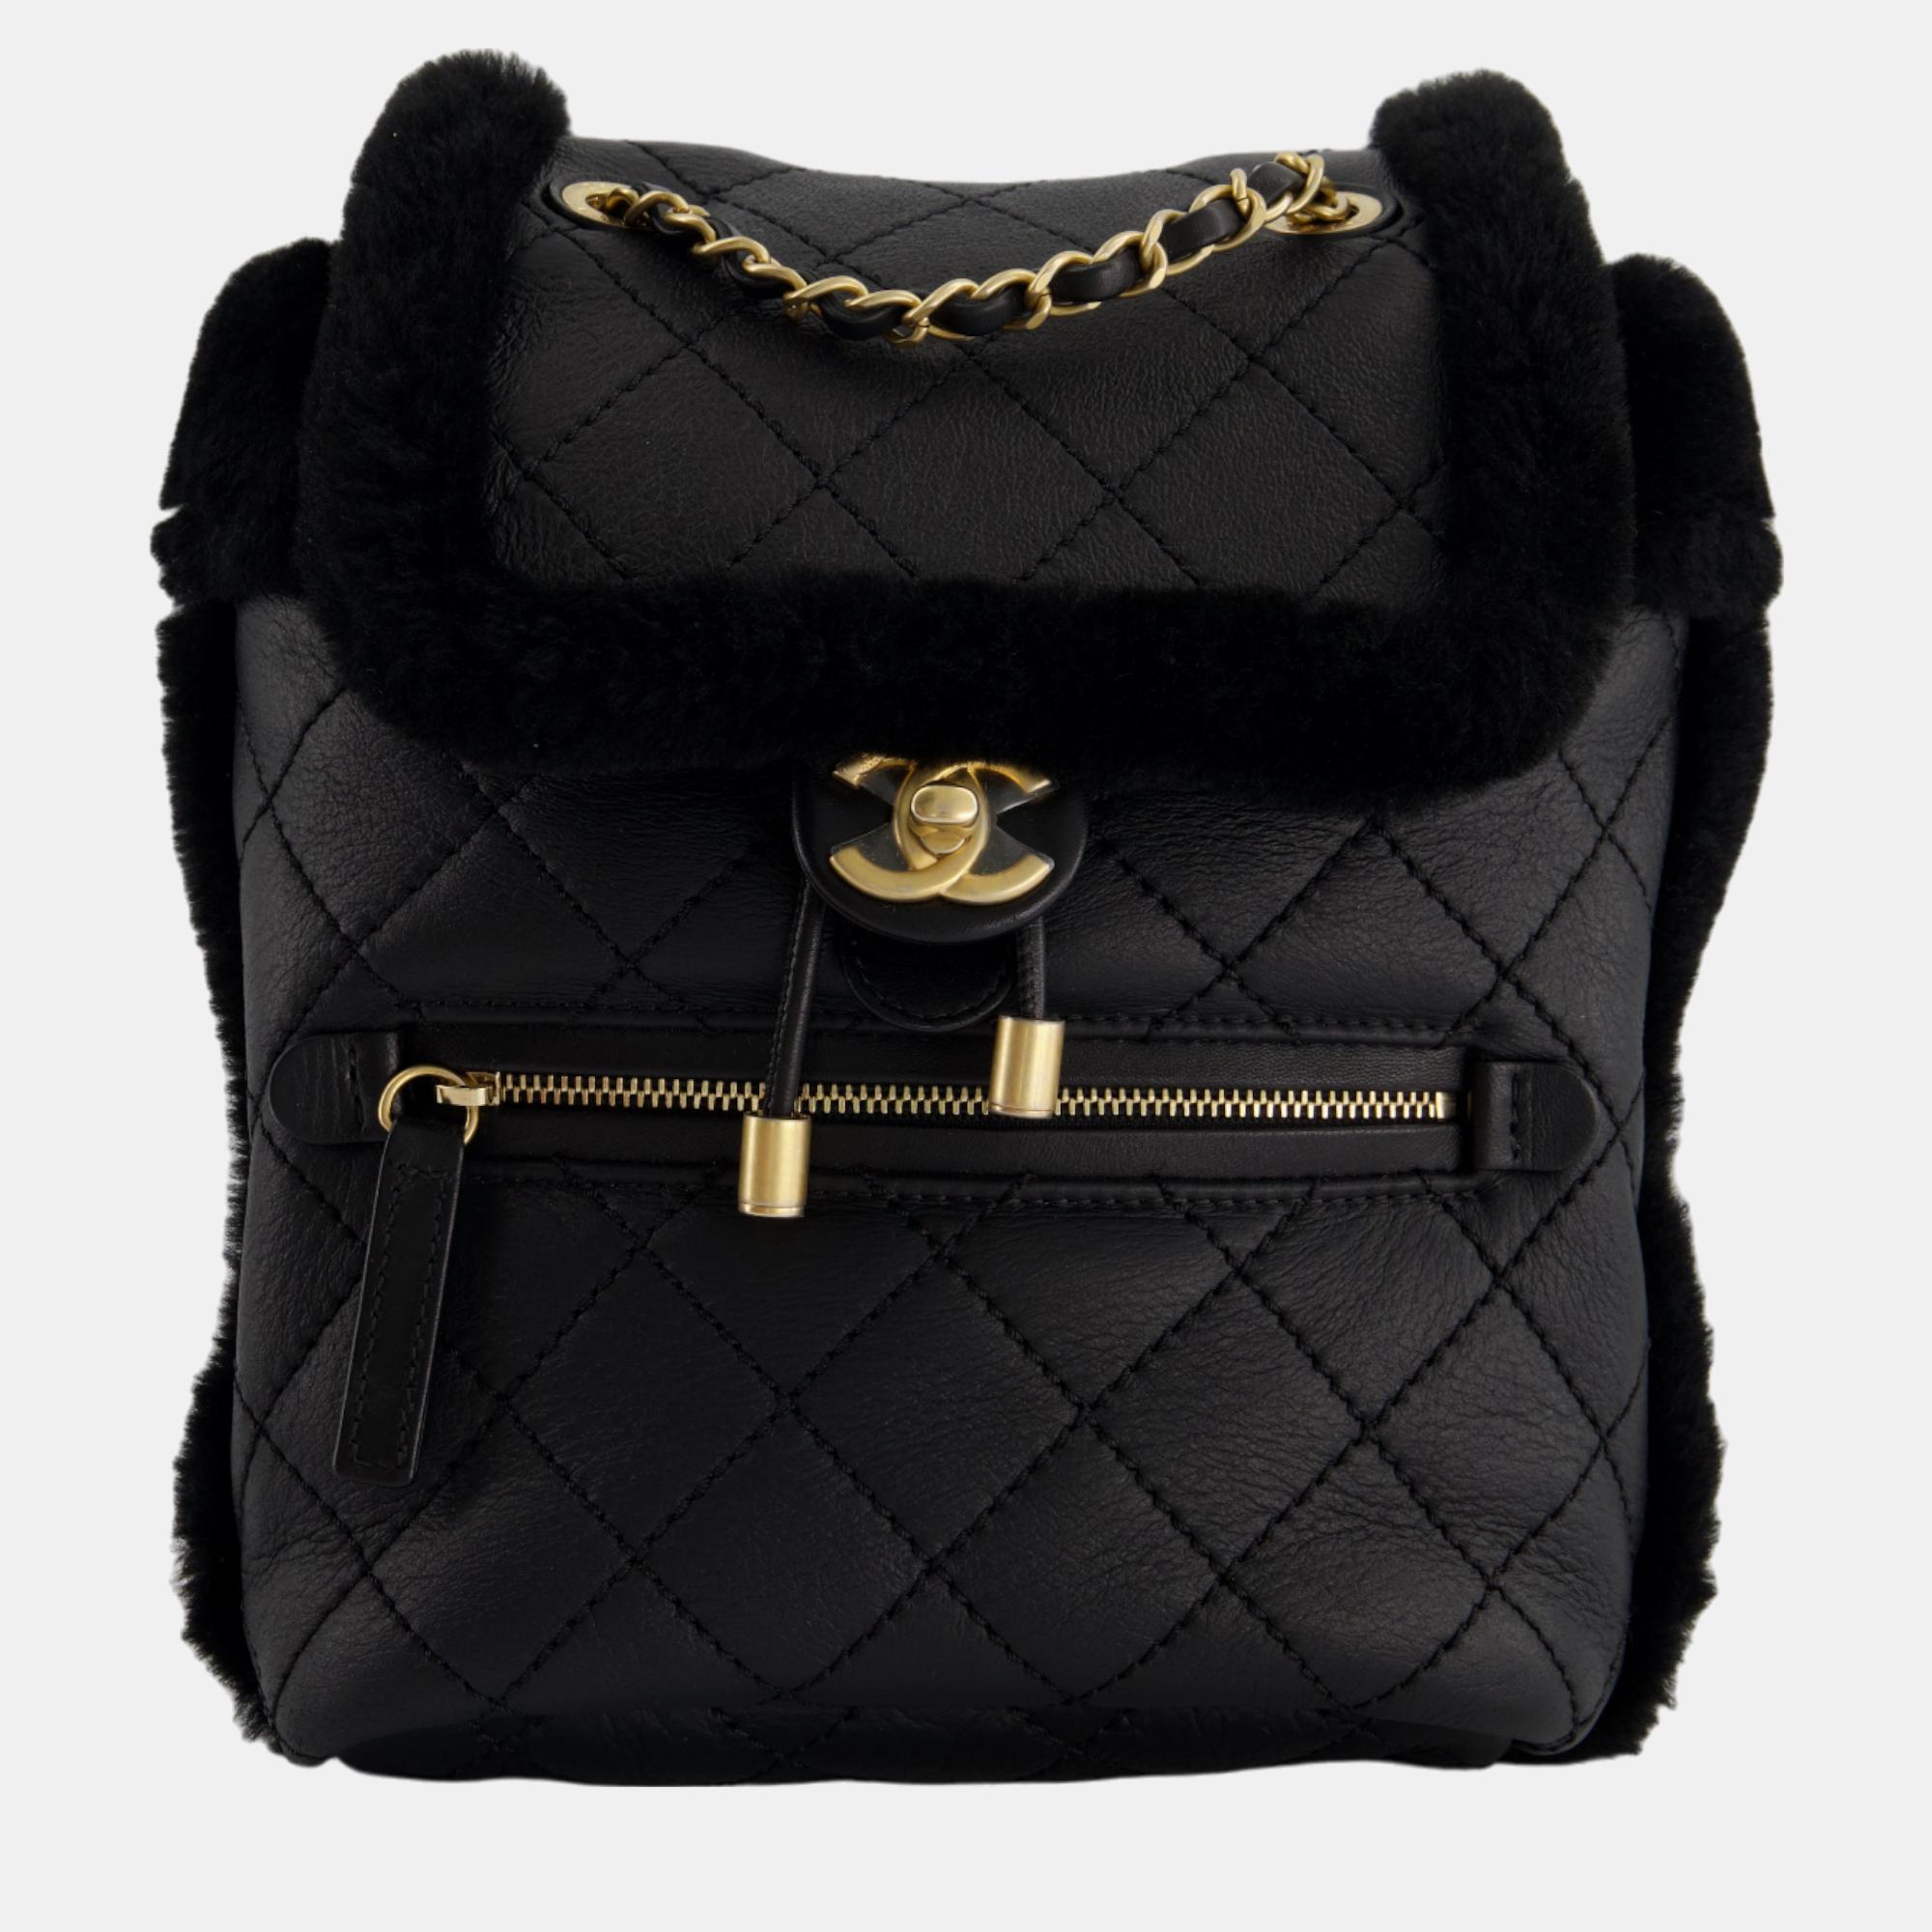 Chanel black calfskin quilted leather and shearling backpack with brushed gold hardware